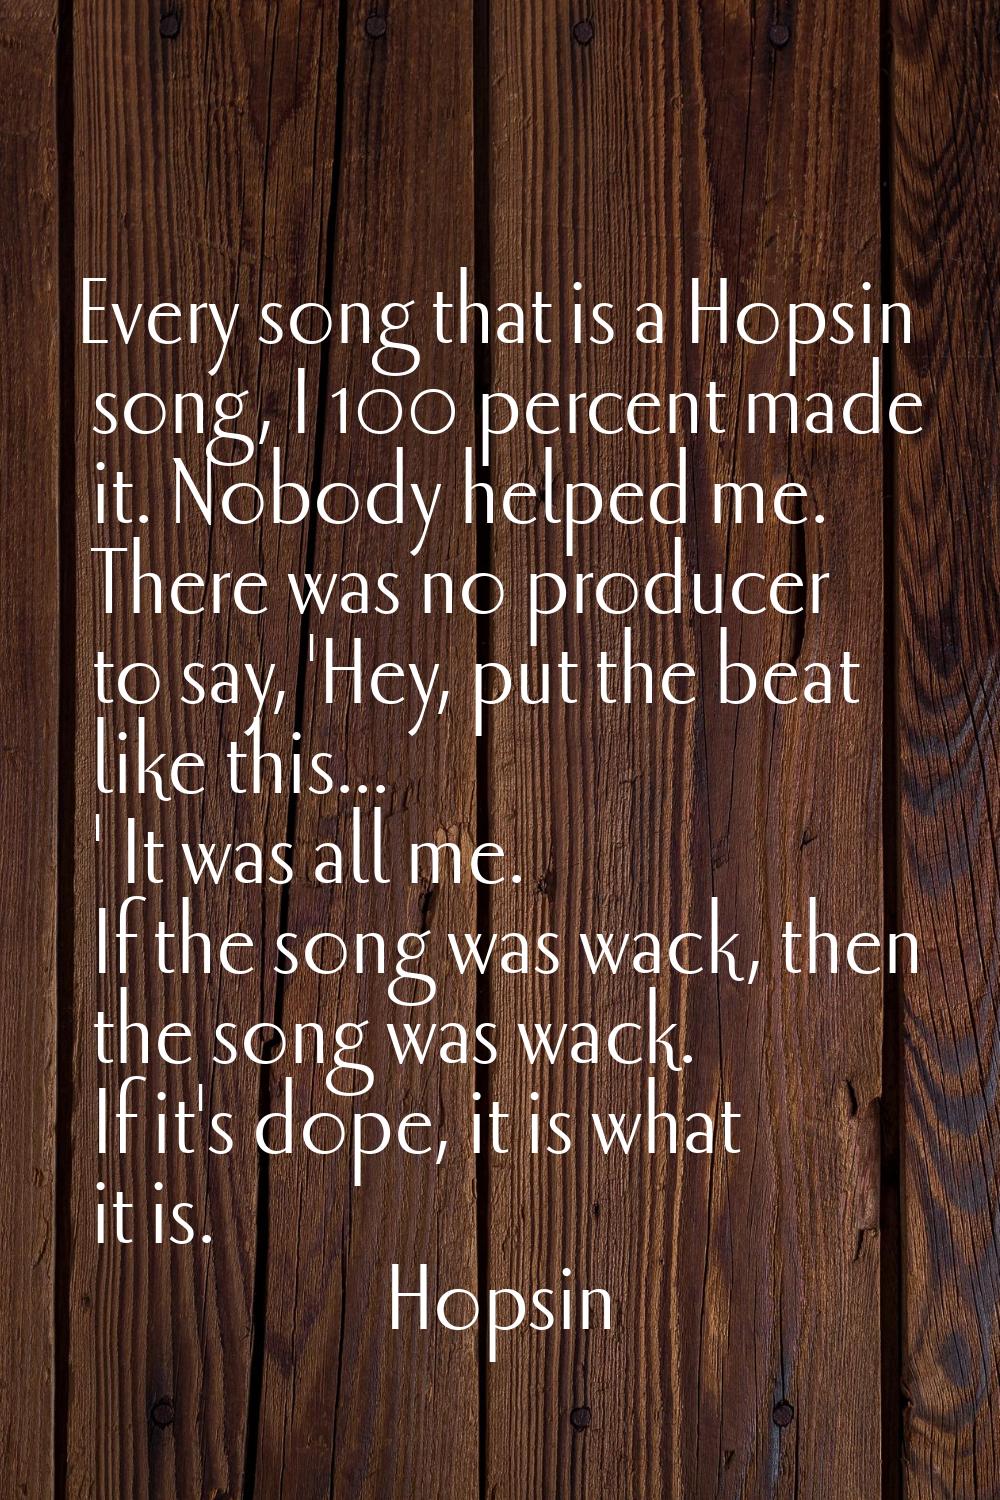 Every song that is a Hopsin song, I 100 percent made it. Nobody helped me. There was no producer to